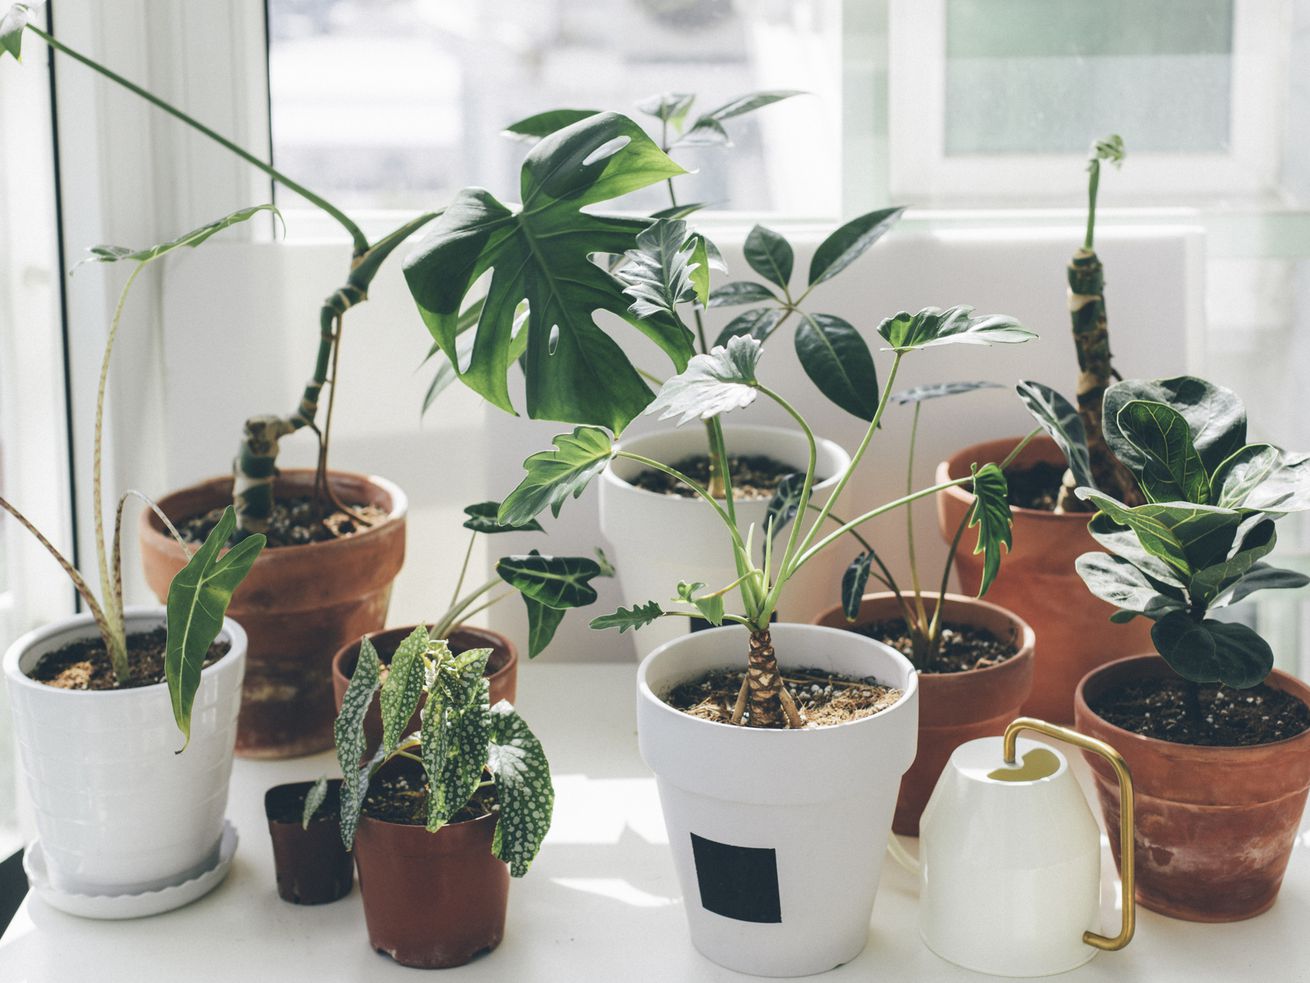 Are your houseplants actually good for the planet?